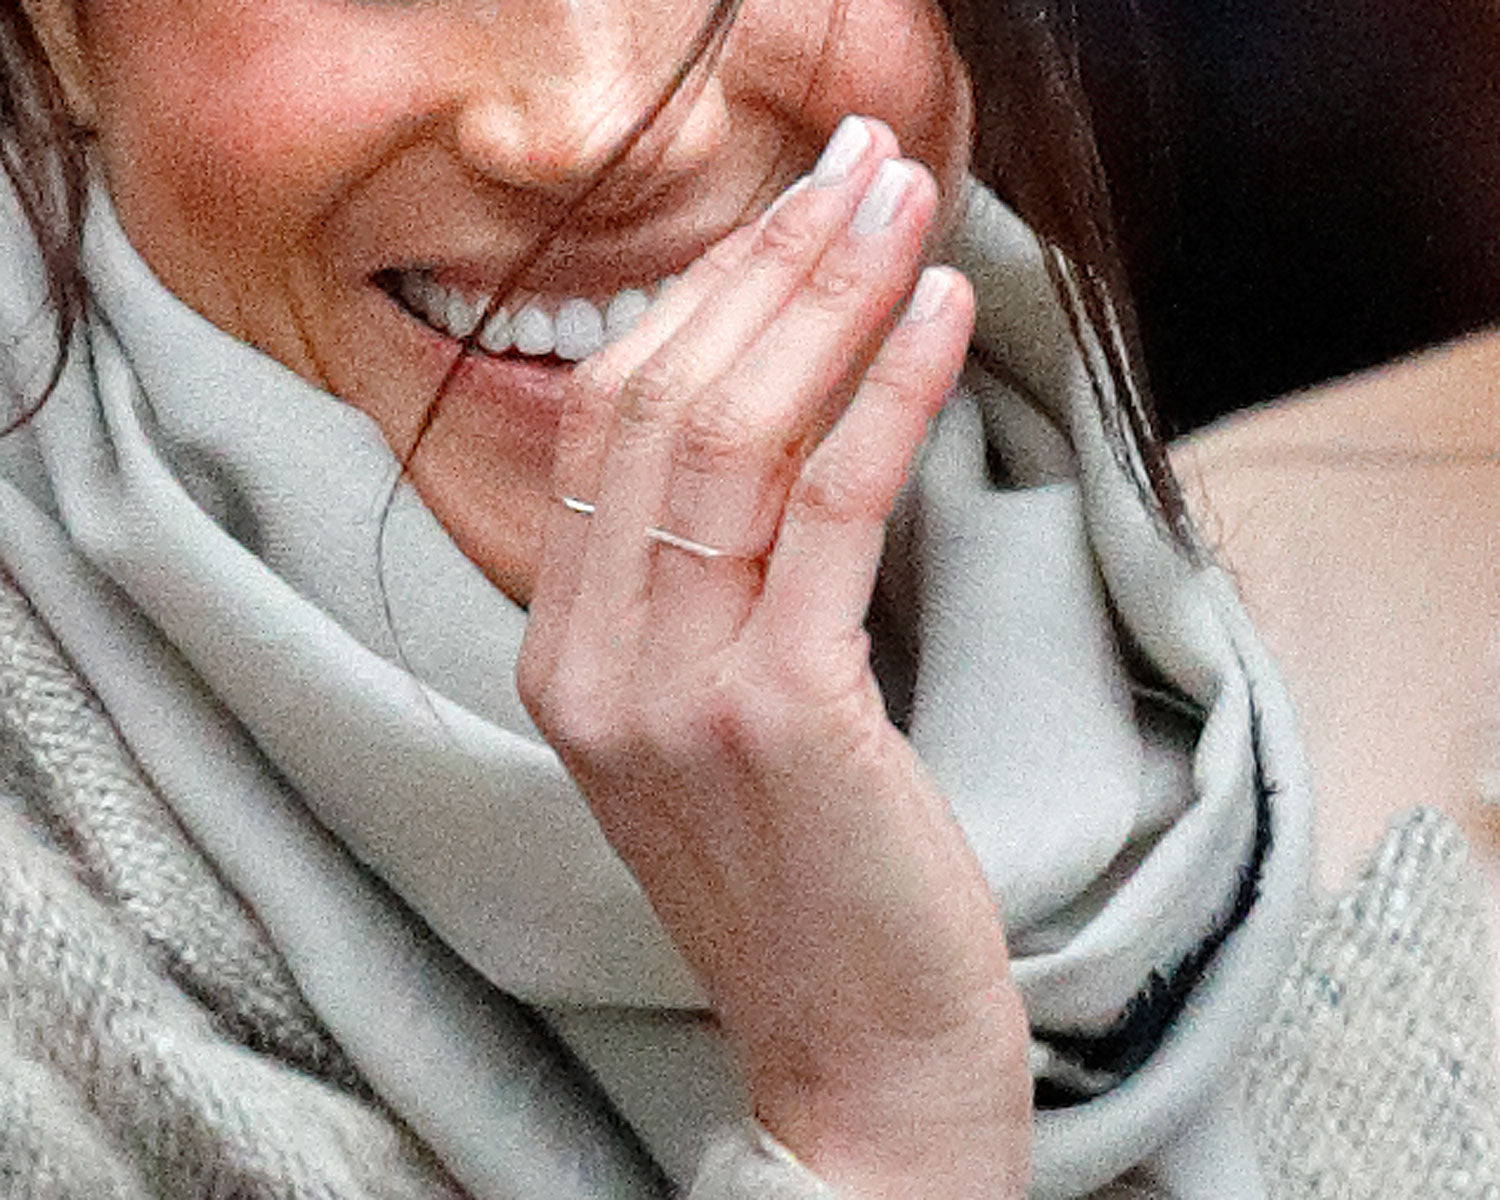 Solving the Mystery Behind Meghan Markle’s Other Diamond Ring